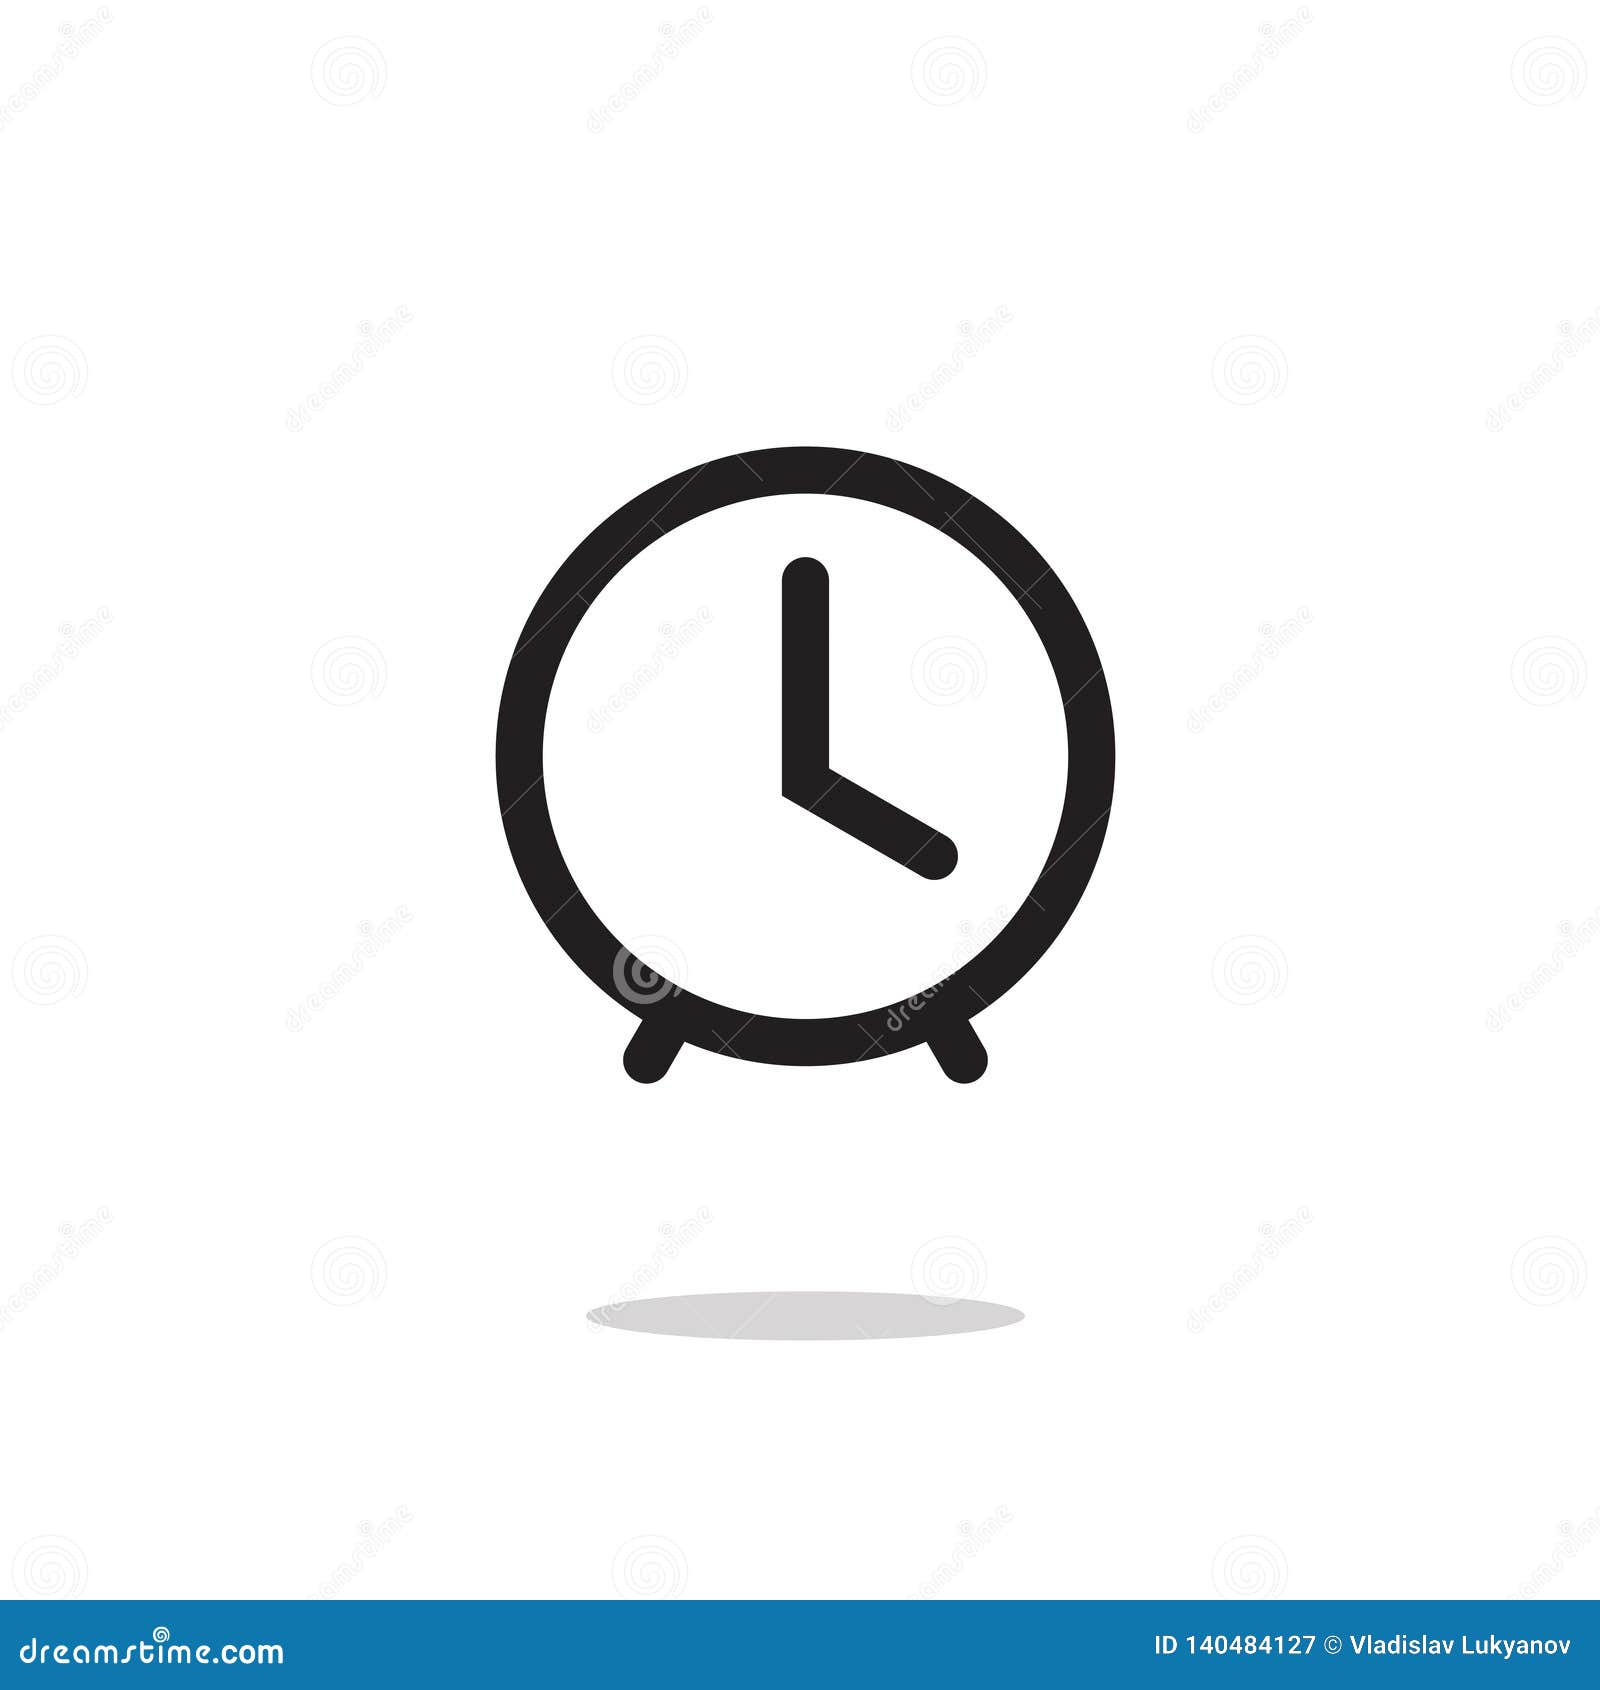 Outline Watch Stock Illustrations 28 252 Outline Watch Stock Illustrations Vectors Clipart Dreamstime